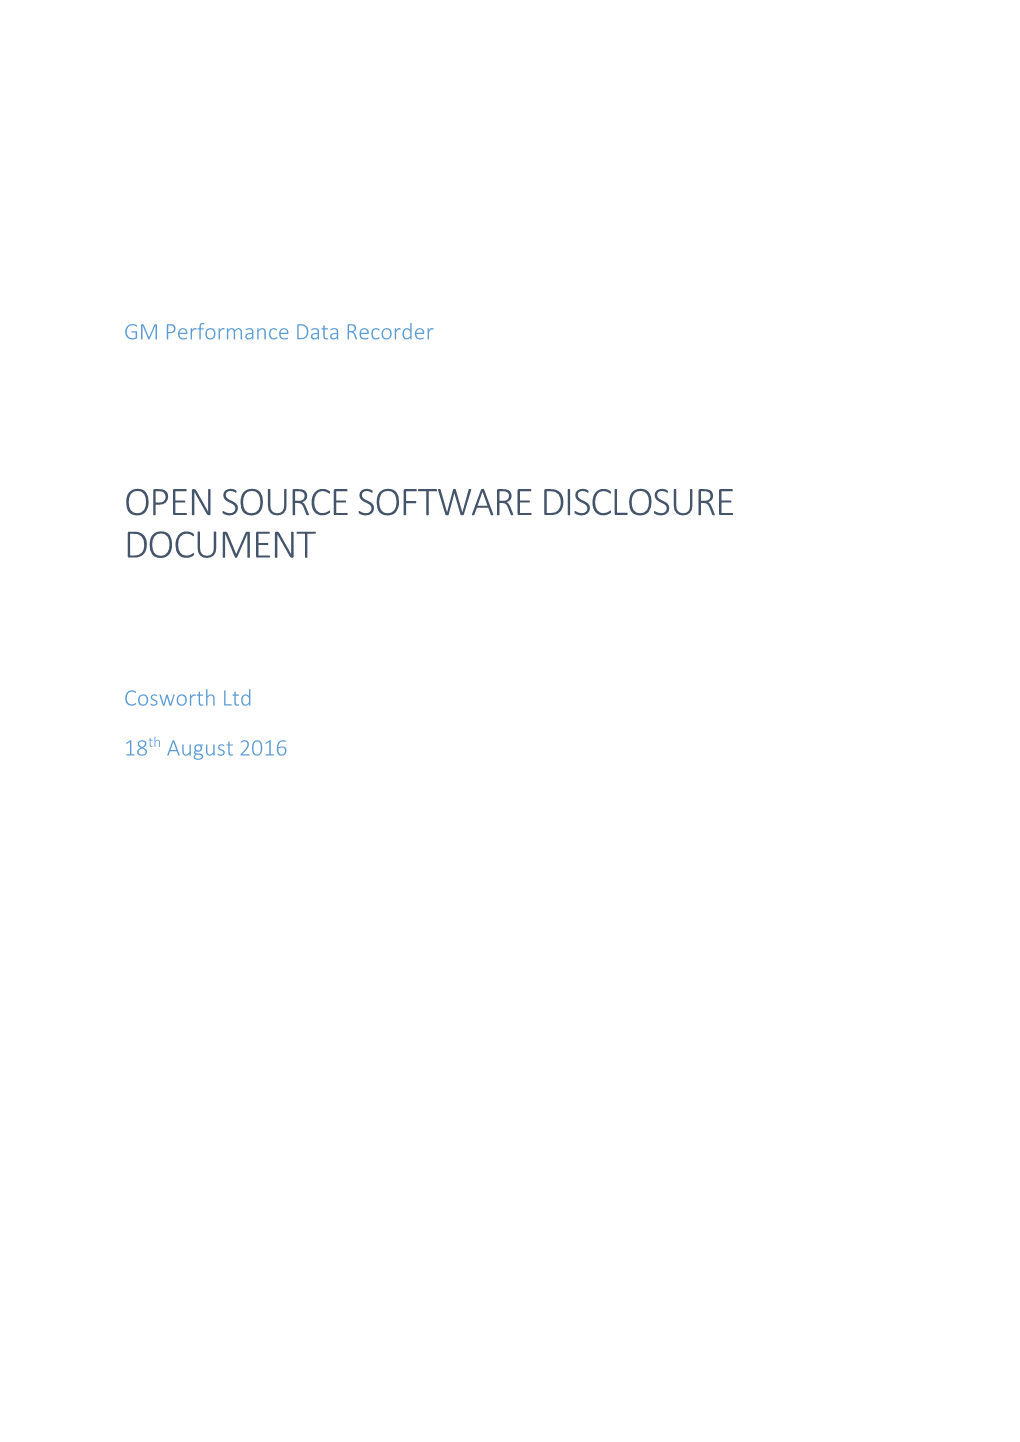 Open Source Software Disclosure Document